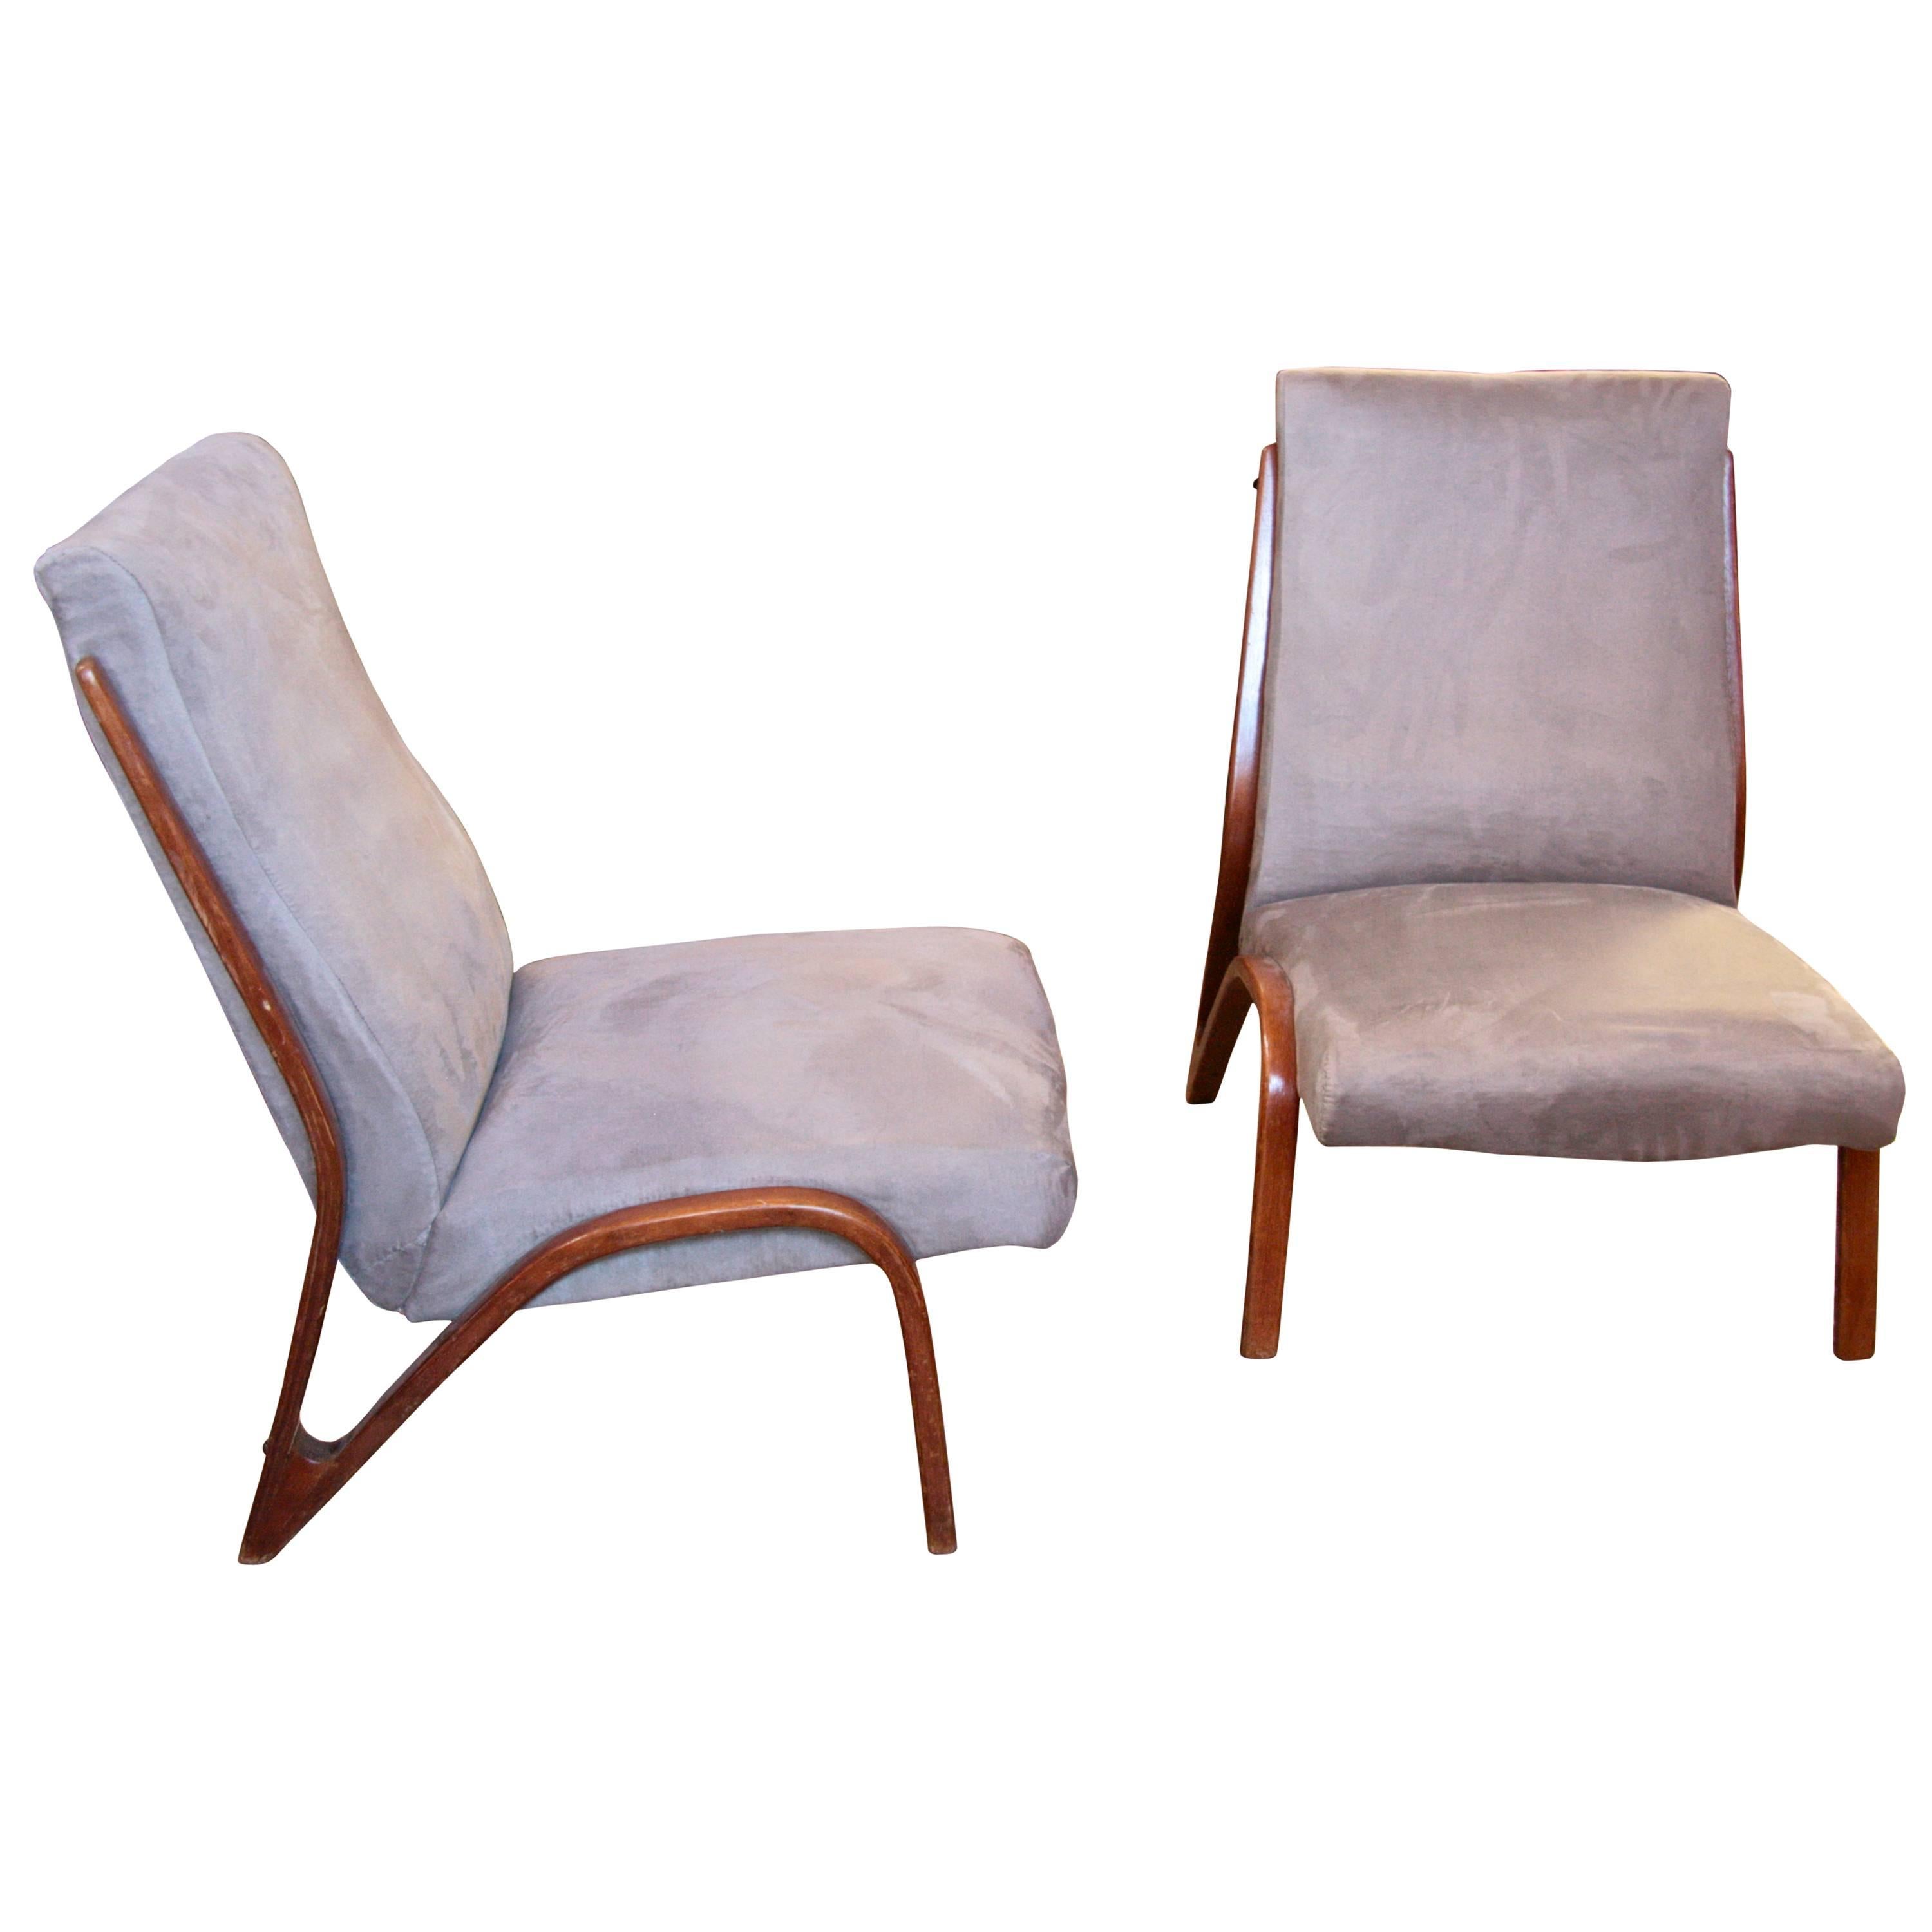 Pair of Sculptural Italian 1960s Lounge Chairs in Velvet Cotton